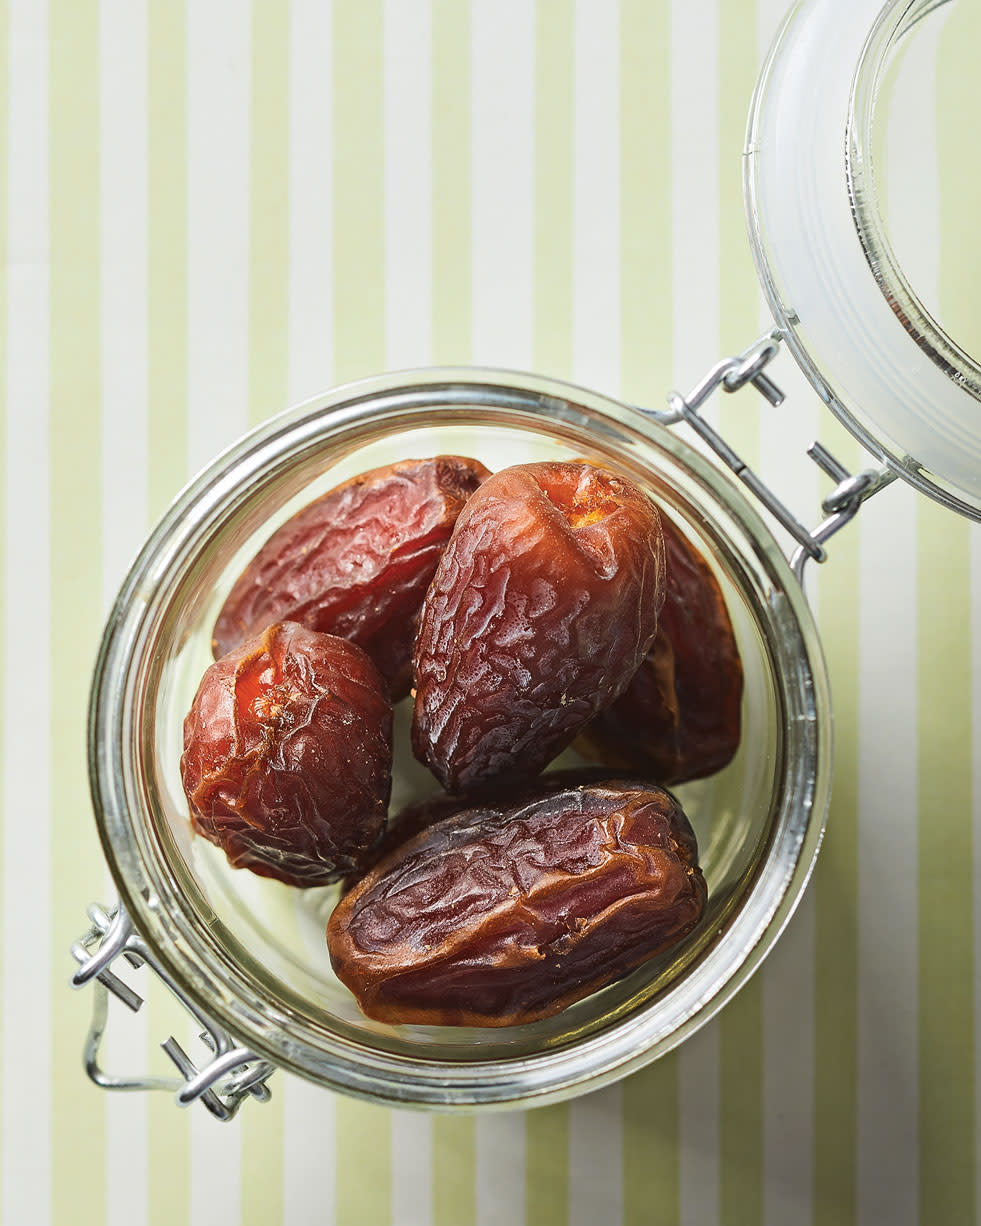 Are dates a healthy replacement for sugar in recipes?